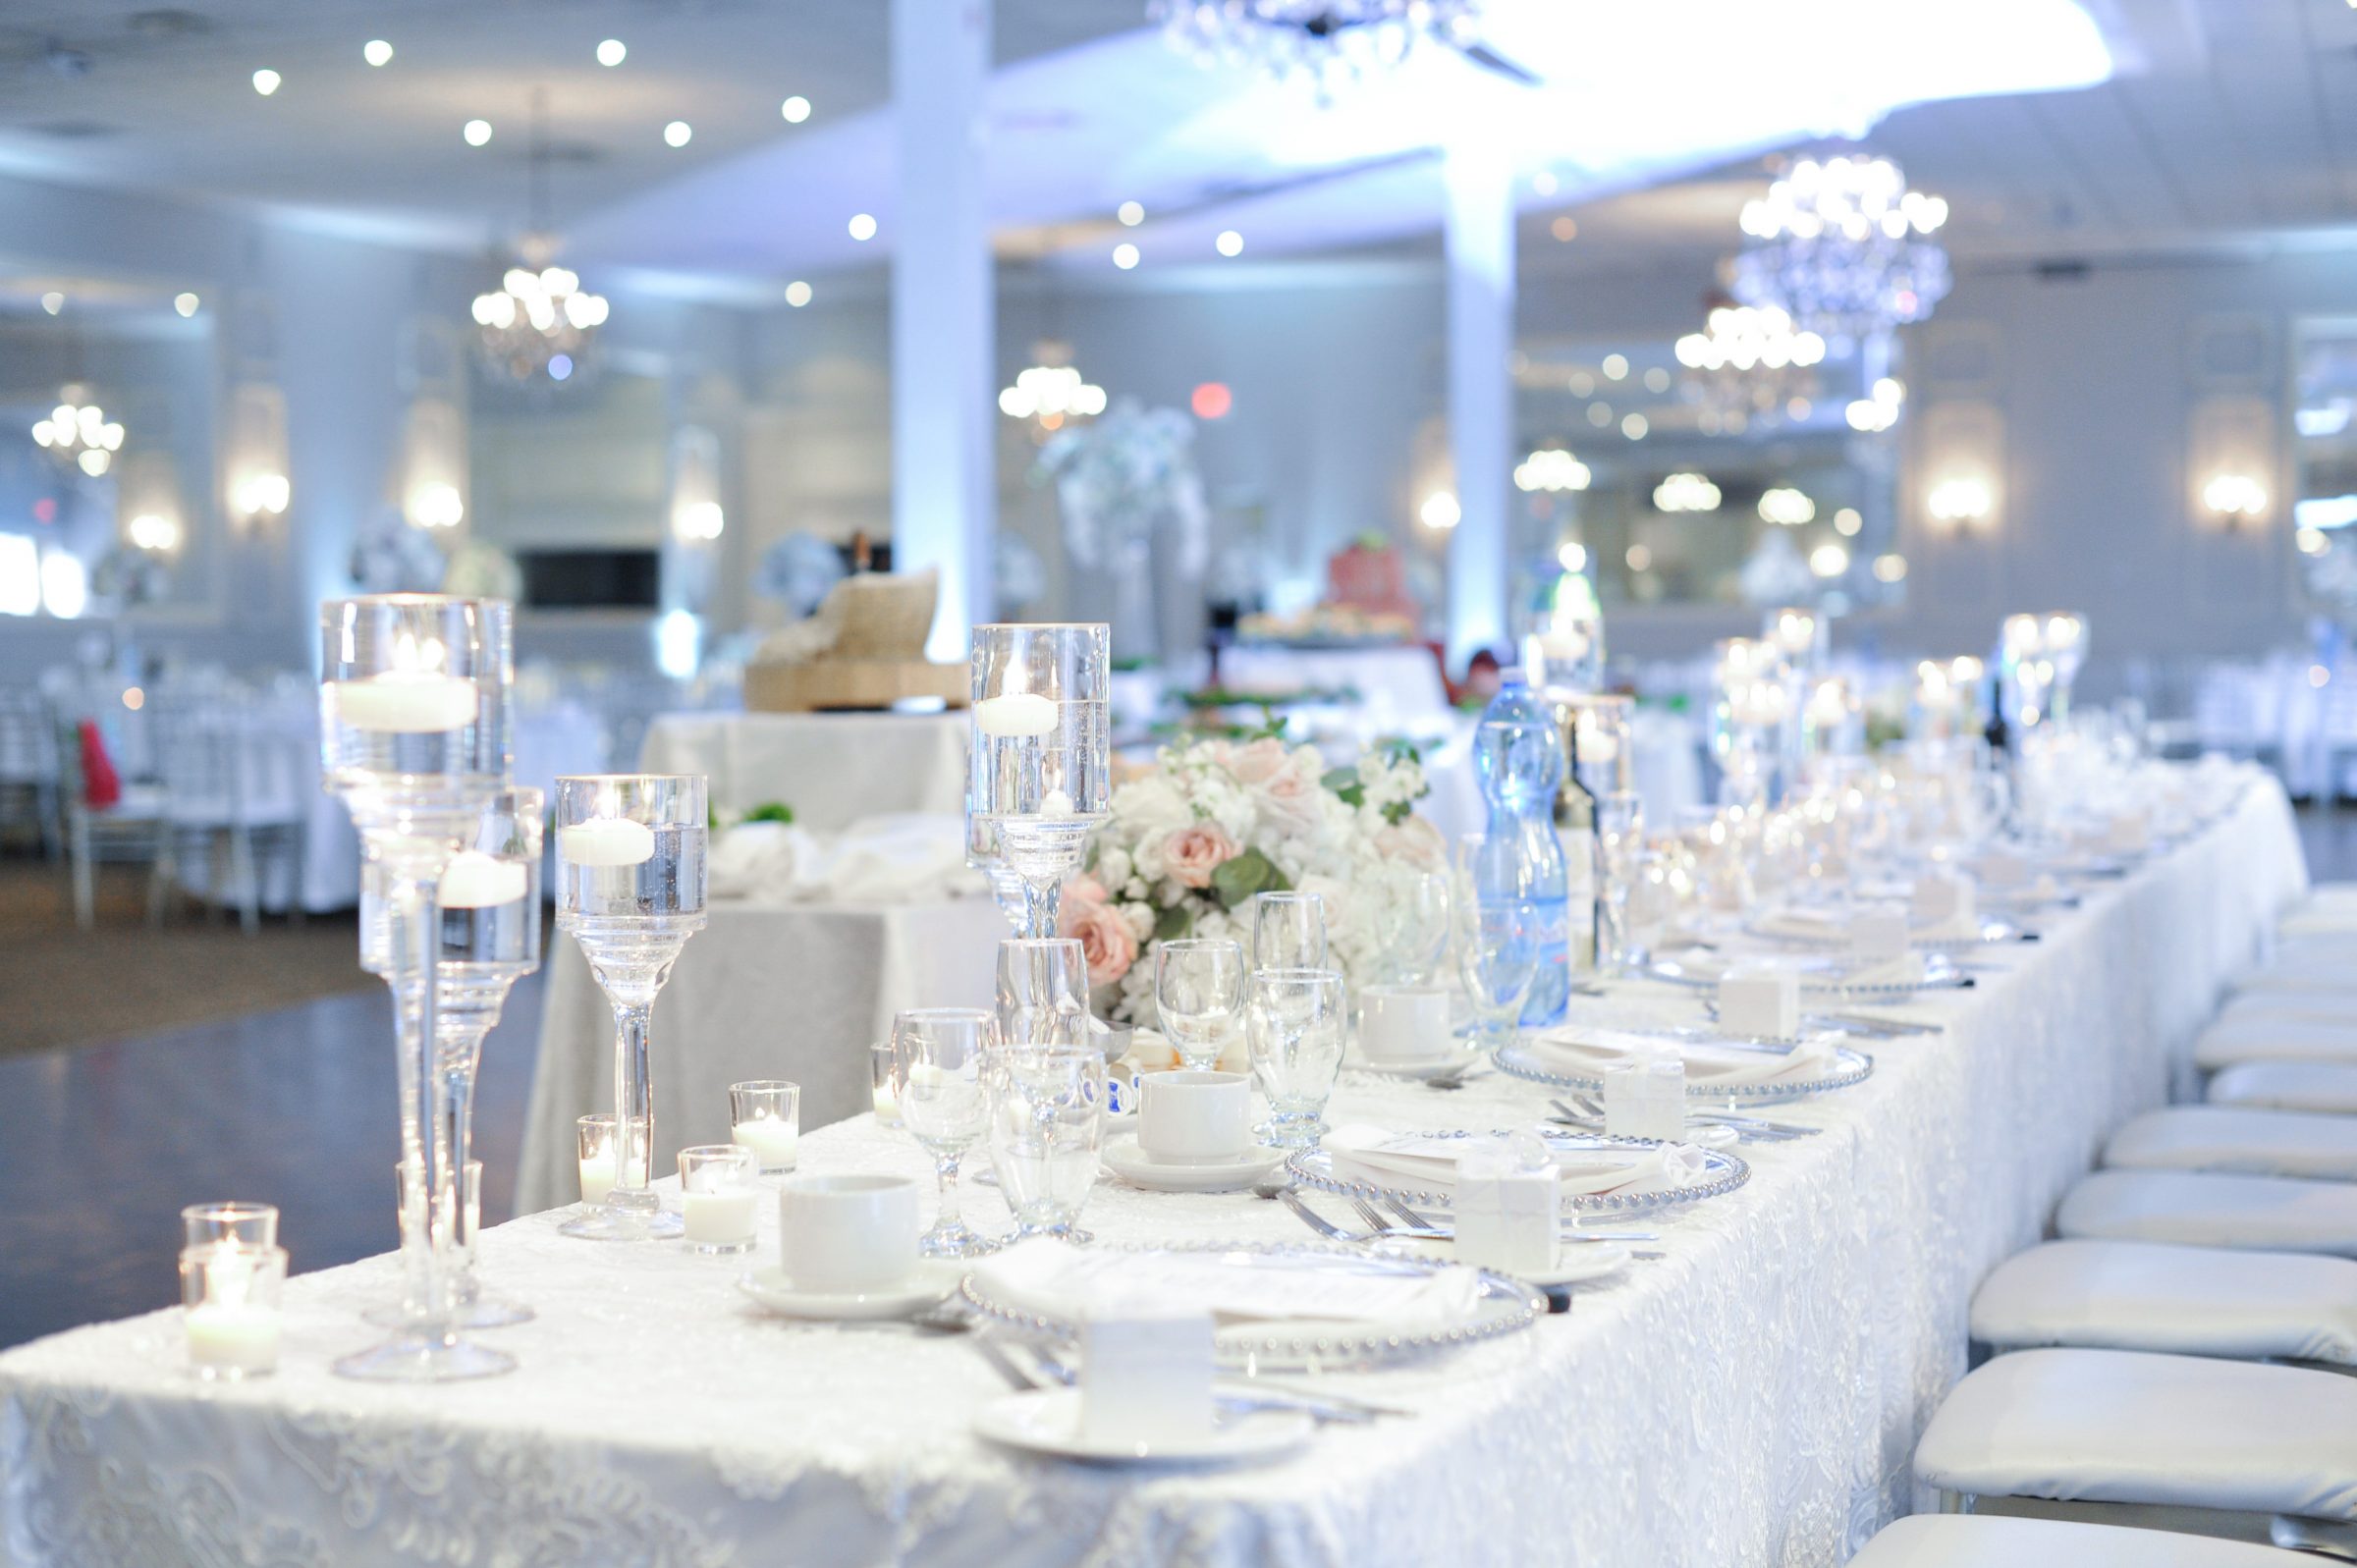 Stunning White and Blush Head Tables